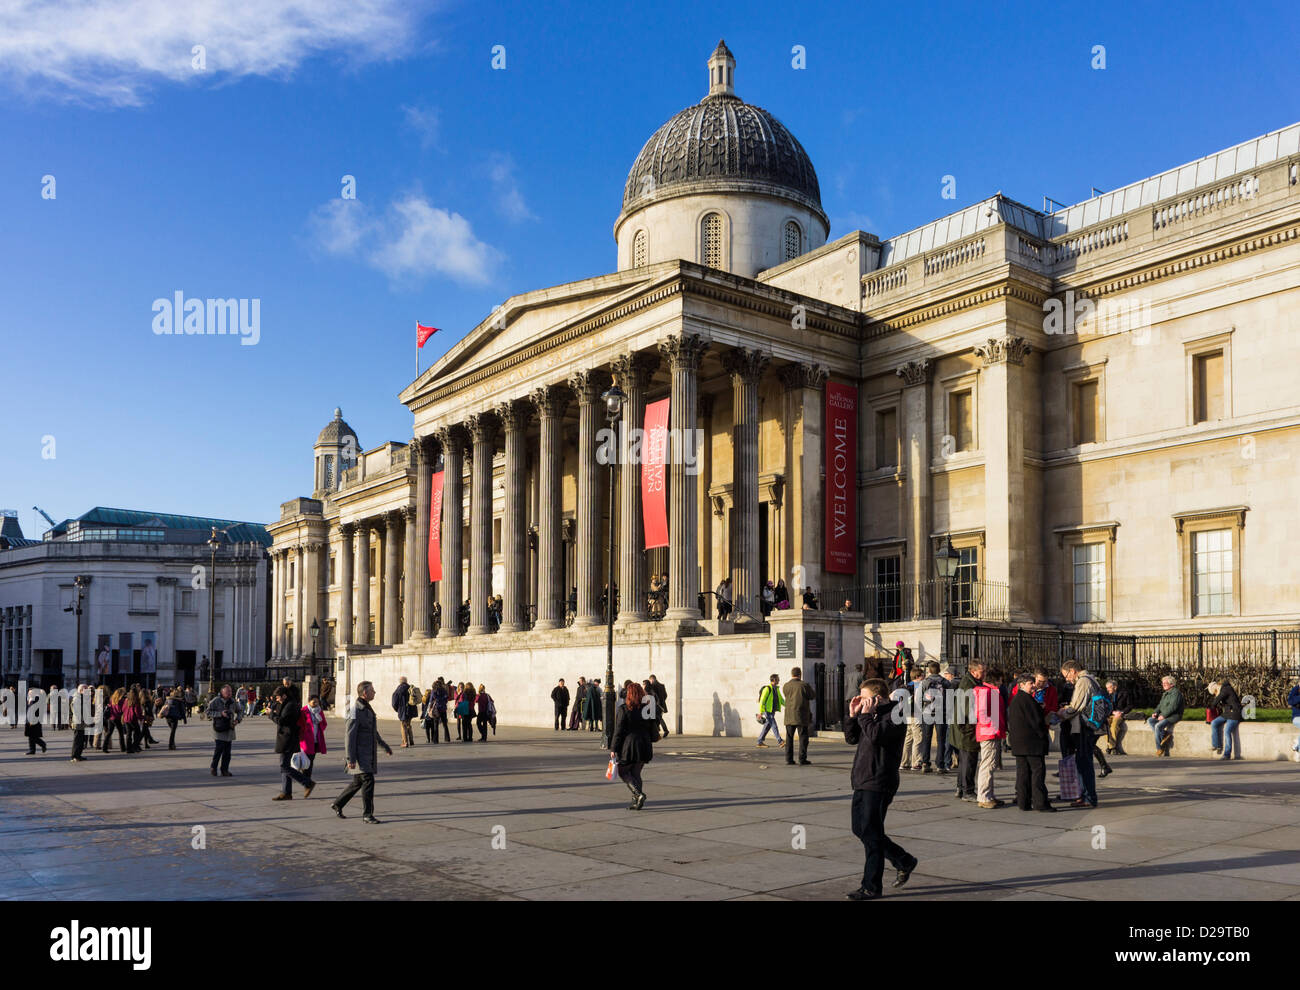 National Gallery, Londres, Angleterre, Royaume-Uni Banque D'Images